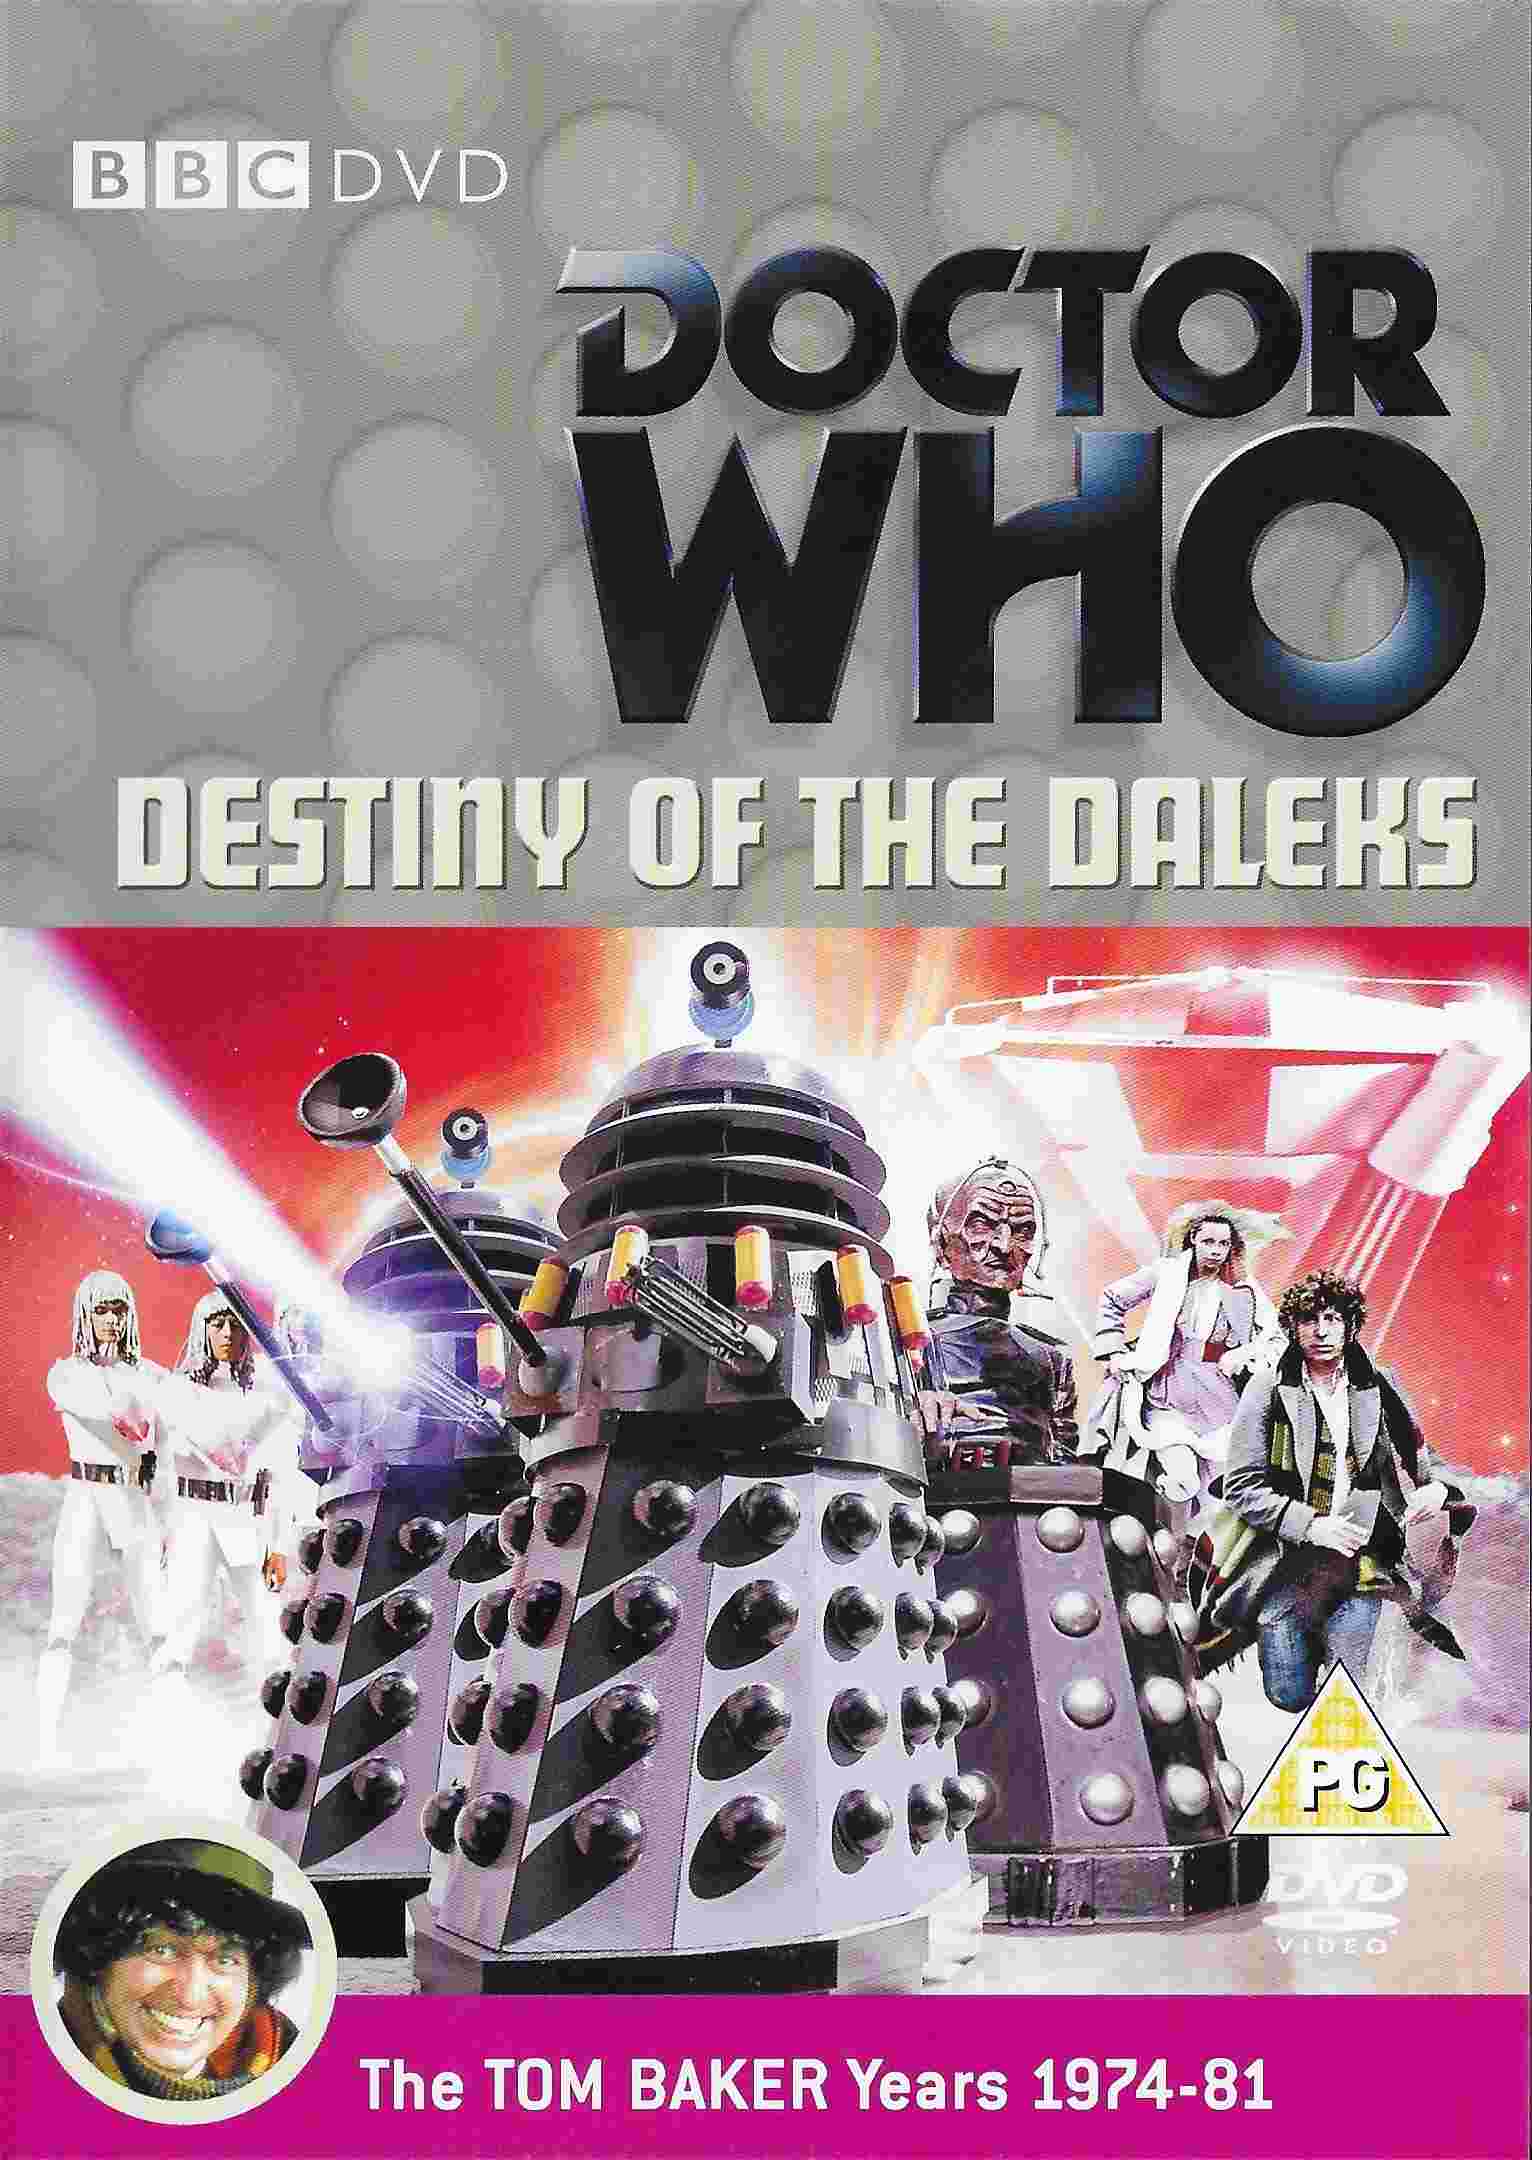 Picture of BBCDVD 2434 Doctor Who - Destiny of the Daleks by artist Terry Nation from the BBC records and Tapes library